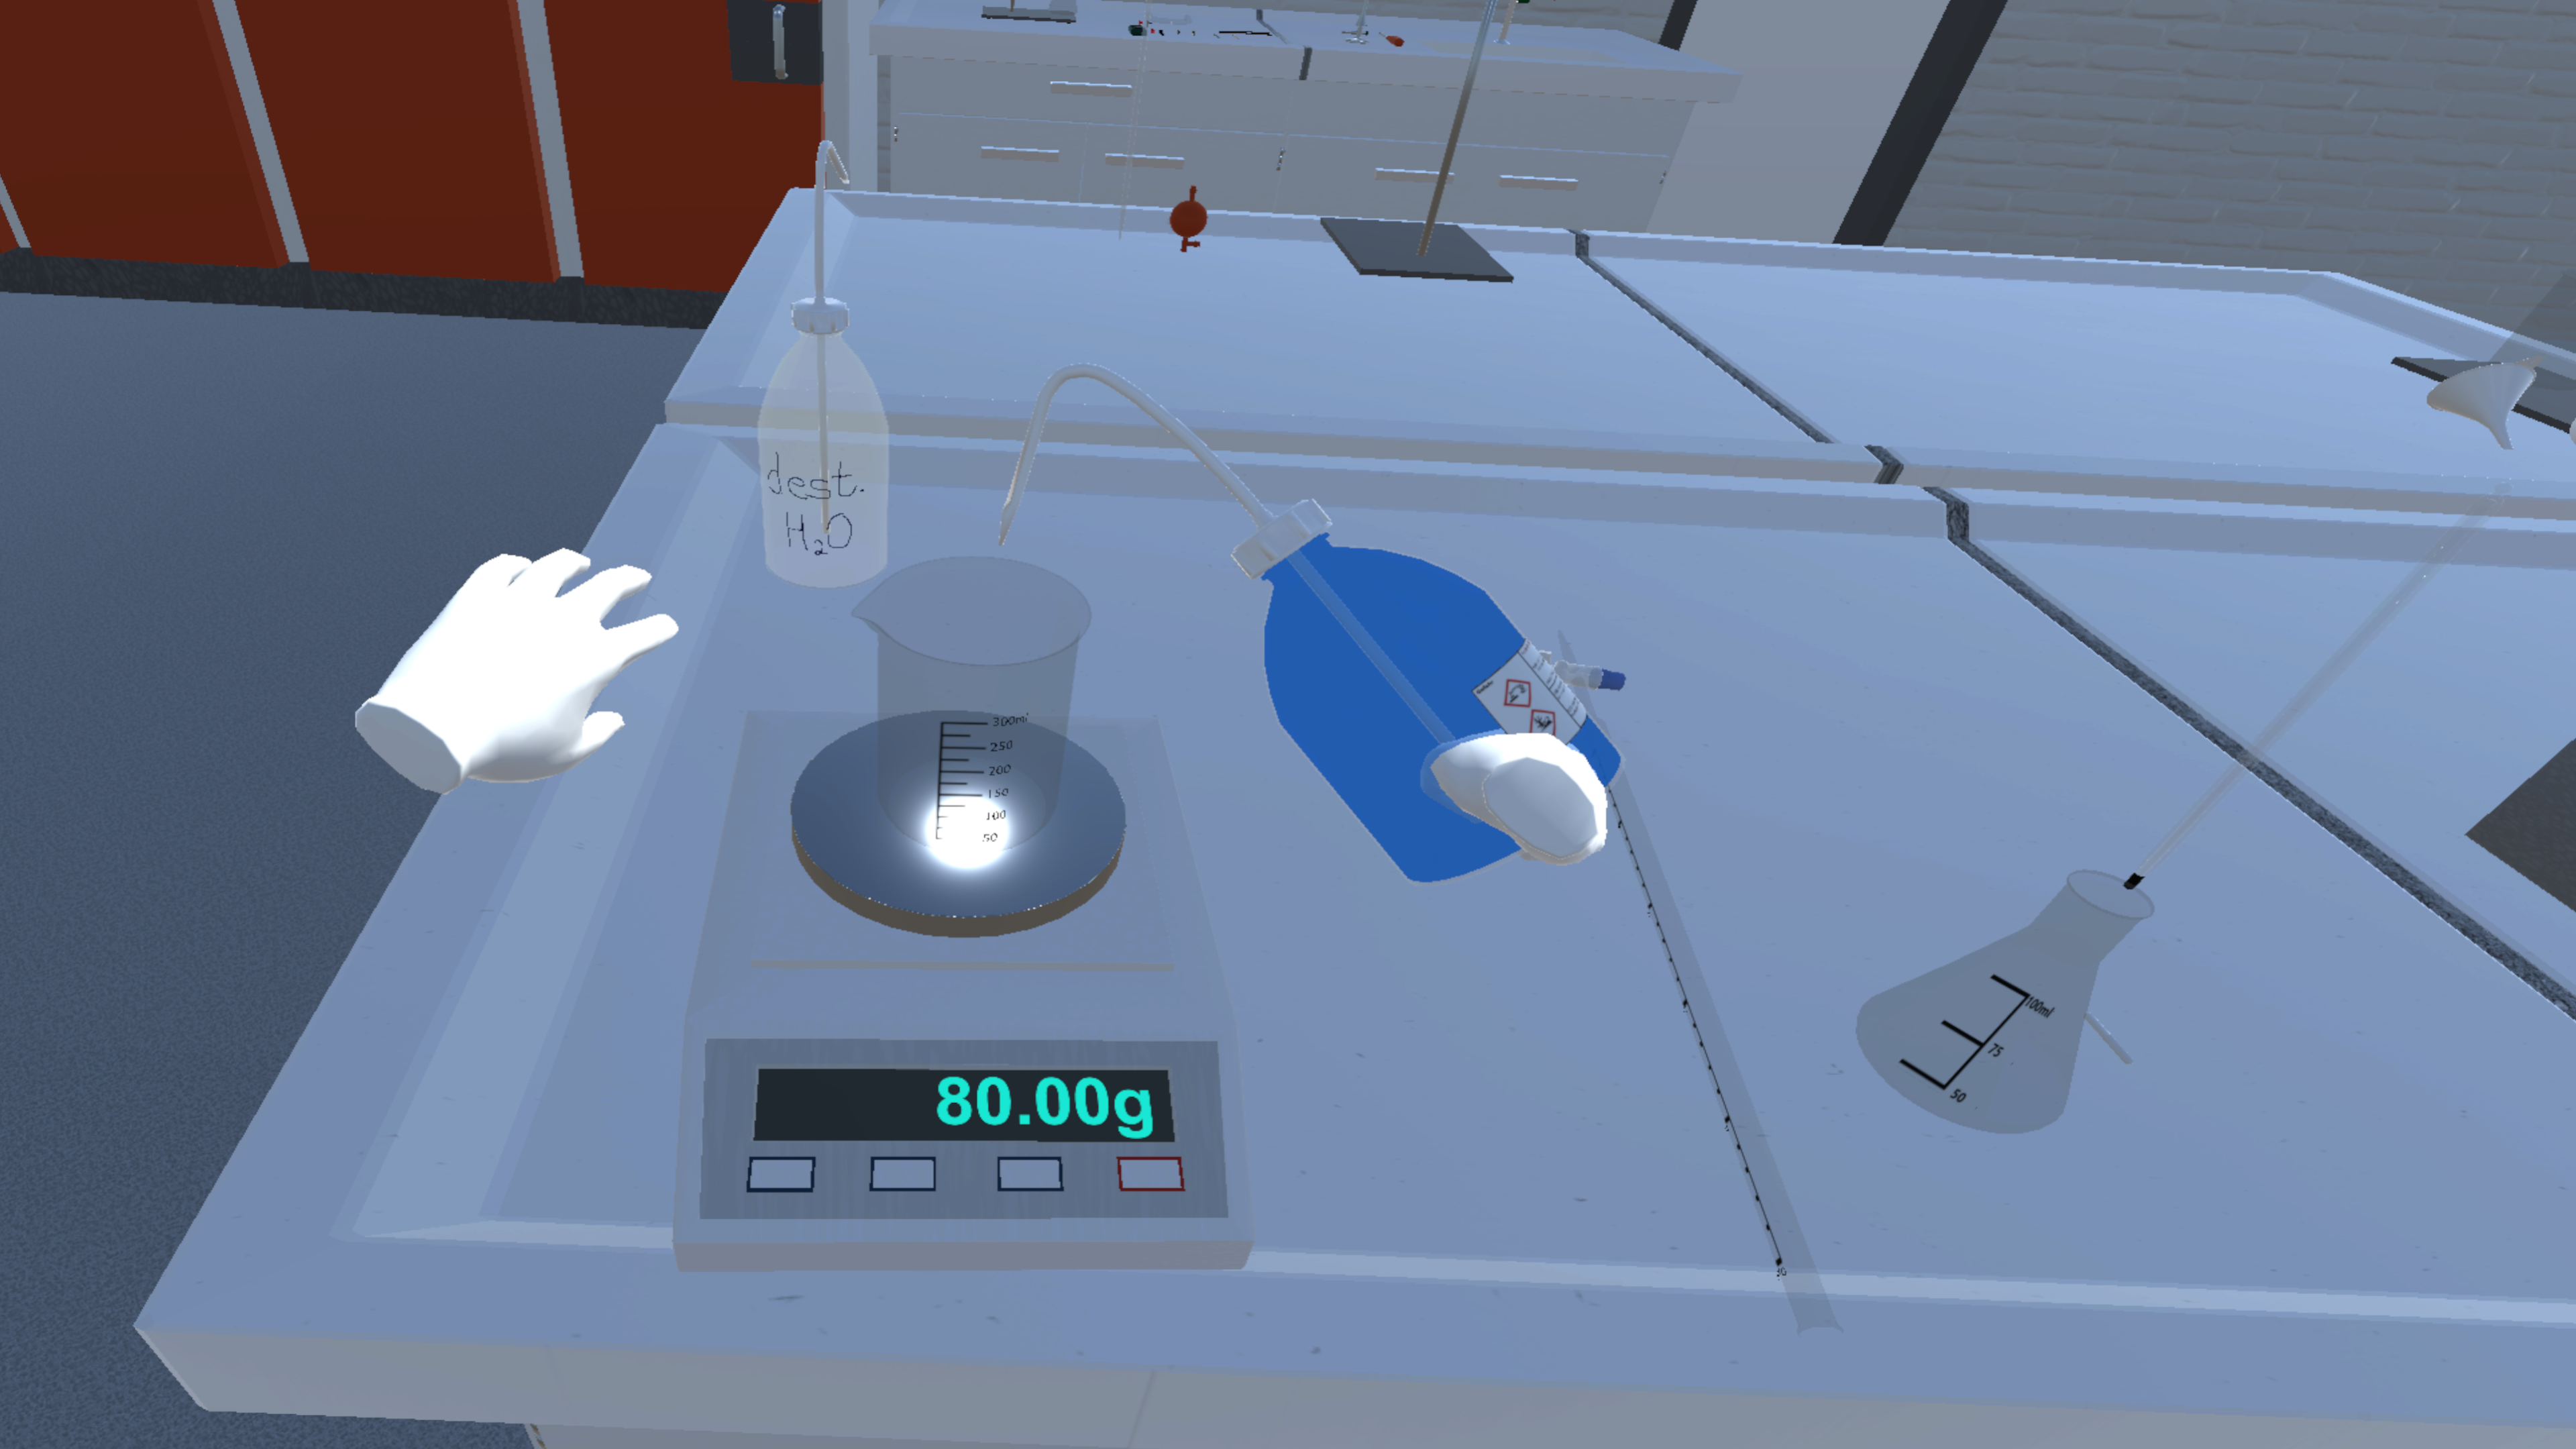 Inside of the virtual chemistry laboratory, a students weighs a quantity of some liquid in a beaker standing on a scale.